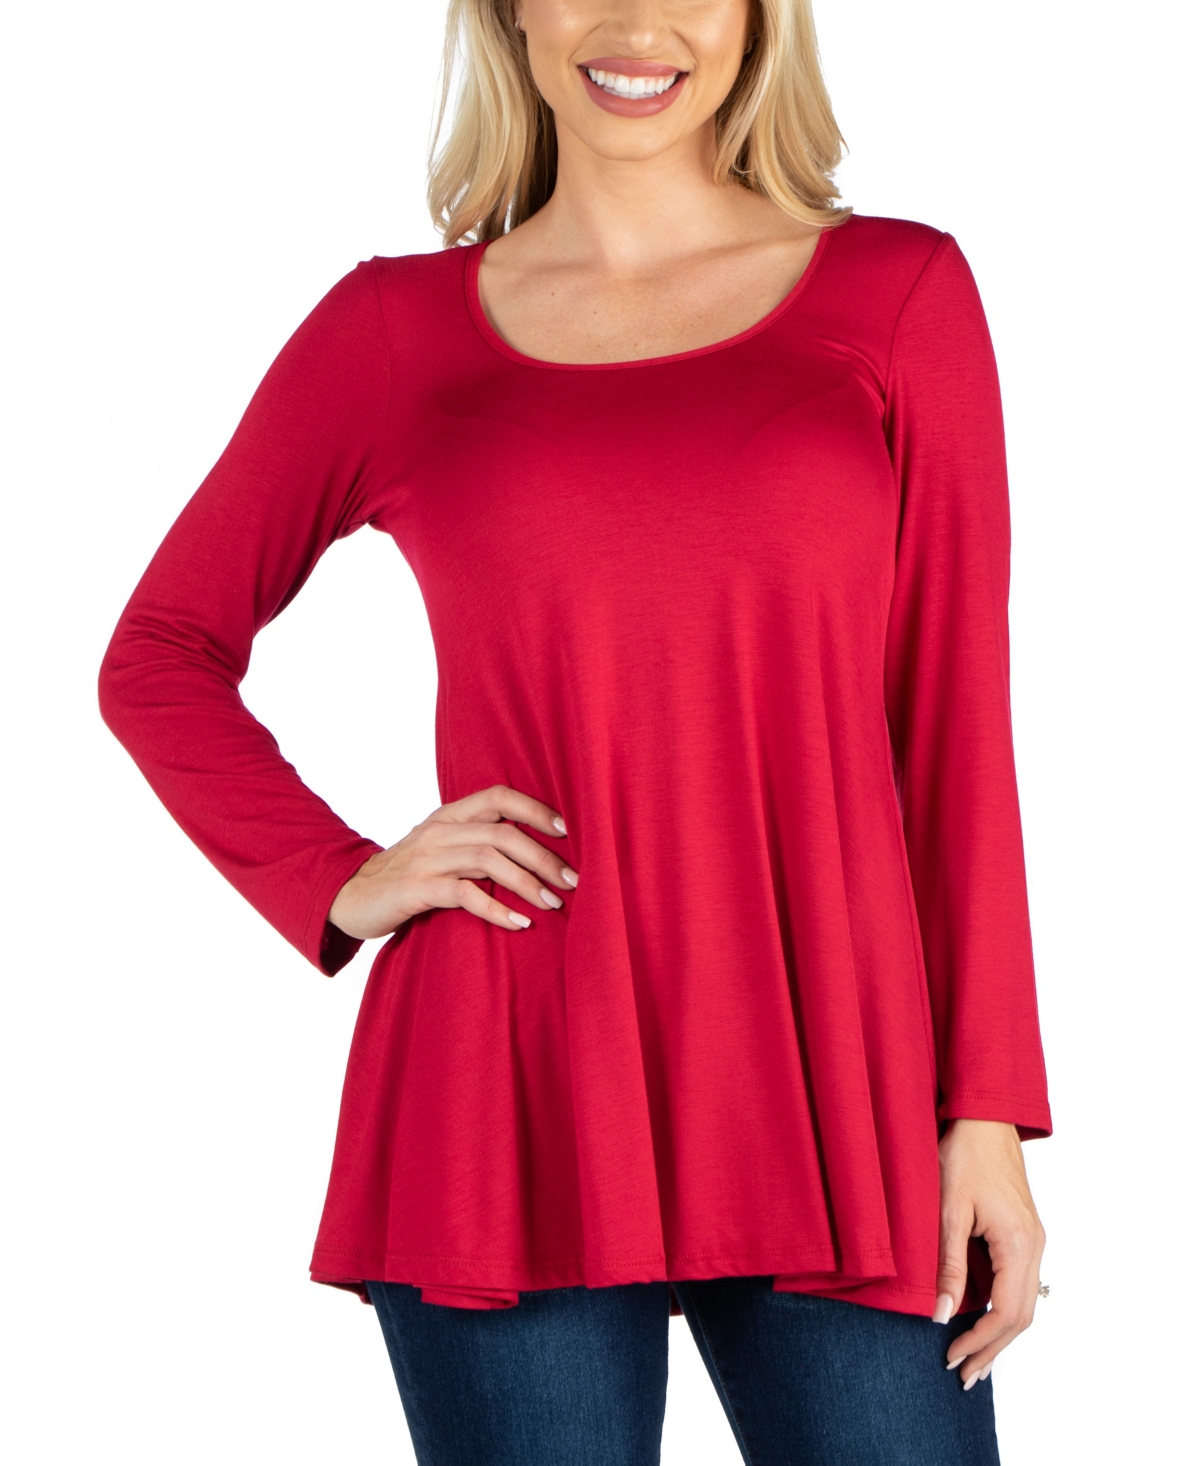 Long Sleeve Solid Color Swing Style Flared Tunic Top - Rust